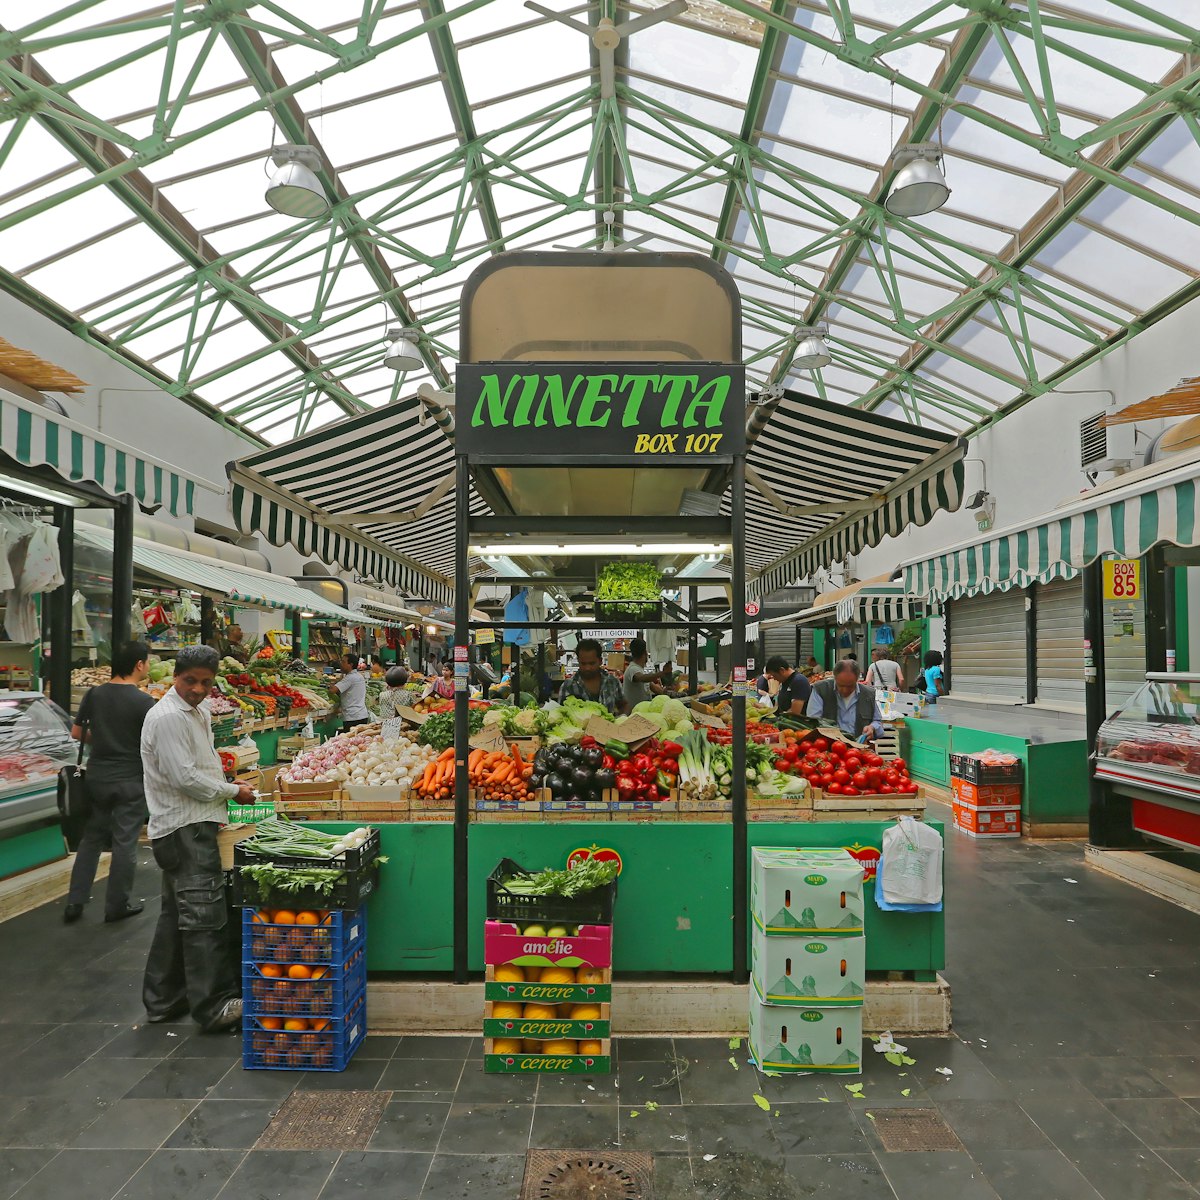 Rome, Italy - June 30, 2014: Fresh Food at New Farmers Market Near Termini Station in Rome, Italy.
1254532389
rome, editorial, farmers market, fruits, indoor, ingredients, interior, market, produce, raw, shoppers, vegetables, nuovo mercato esquilino